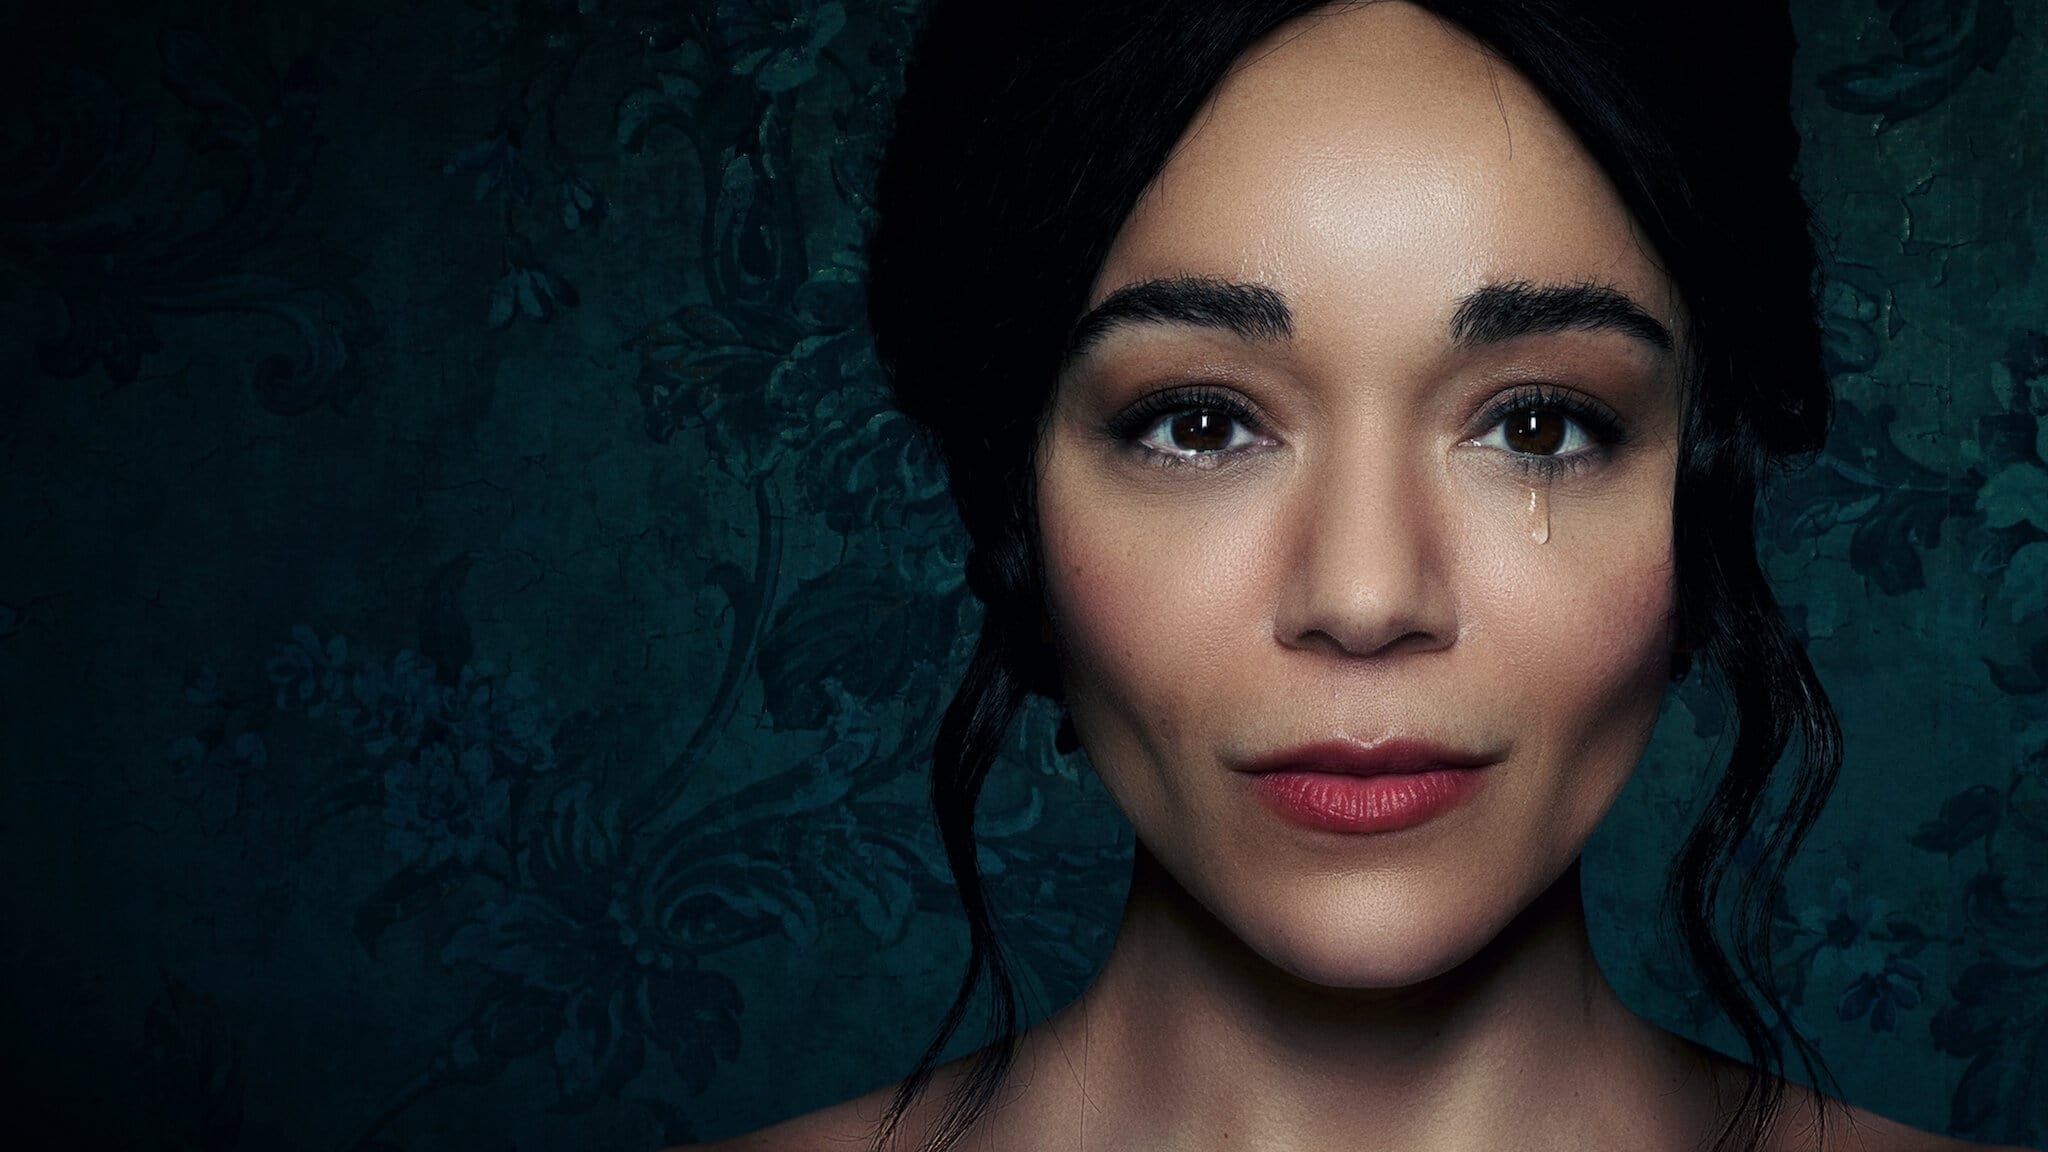 The Strays' star Ashley Madekwe sheds a tear againsr a sage background in this promotional image.